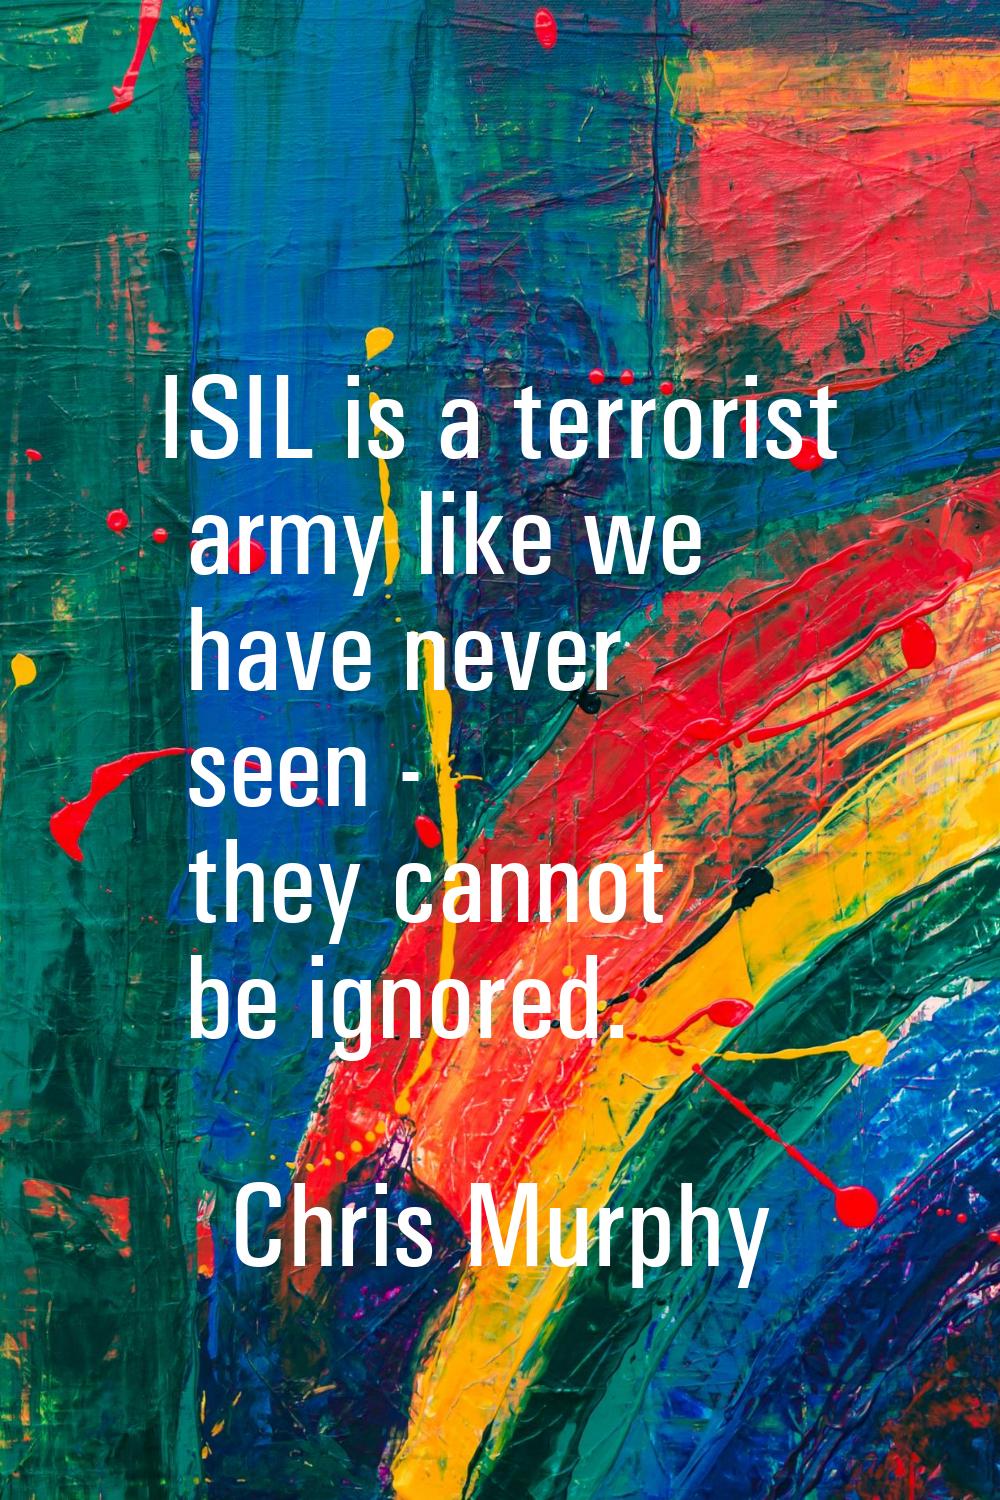 ISIL is a terrorist army like we have never seen - they cannot be ignored.